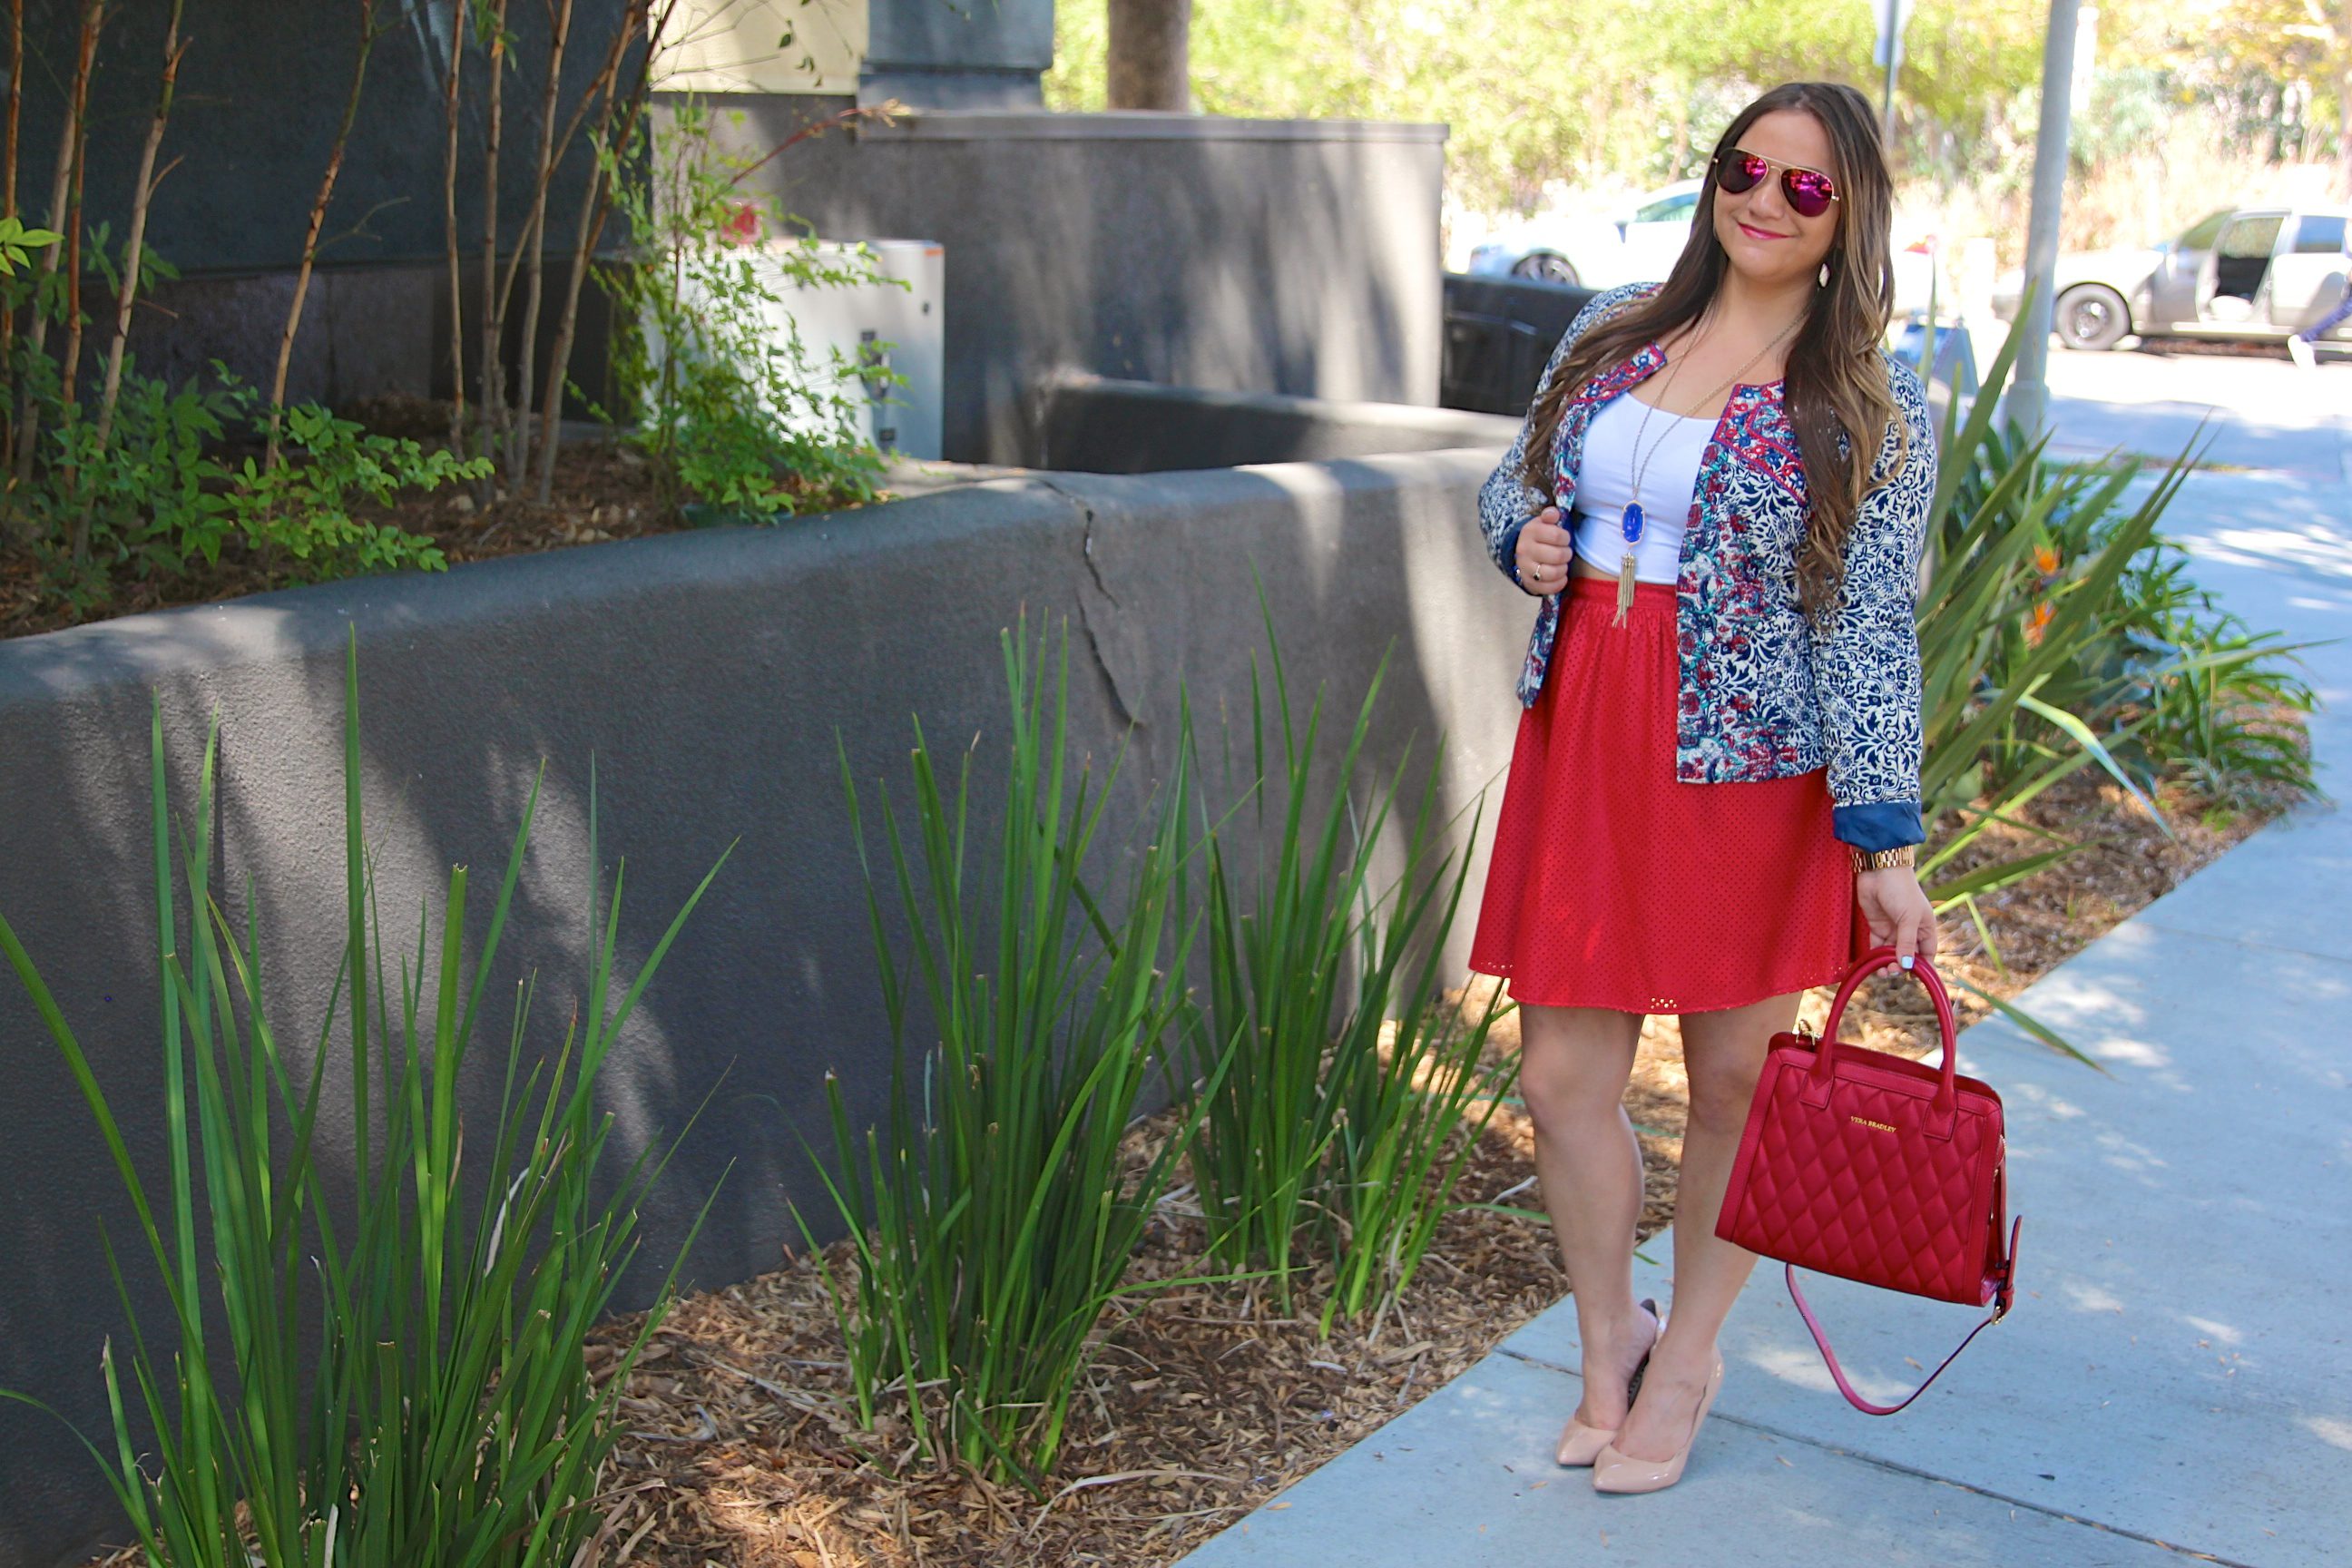 missyonmadison, melissa tierney, shabby apple, shabby apple jacket, embroidered jacket, cropped jacket, cropped printed blazer, red faux leather skirt, red a line skirt, nude pumps, steve madden pumps, nude pointed toe pumps, vera bradley, red vera bradley satchel, kendra scott rayne necklace, kendra scott necklace, white crop top, go jane crop top, ray bans, red mirrored aviators, red sunglasses, printed cropped jacket, brunette hairstyle, curled hair, red skirt, holiday style, fashion blogger, outfit inspo, ootd, fashion blogger, la blogger, vera bradley style,